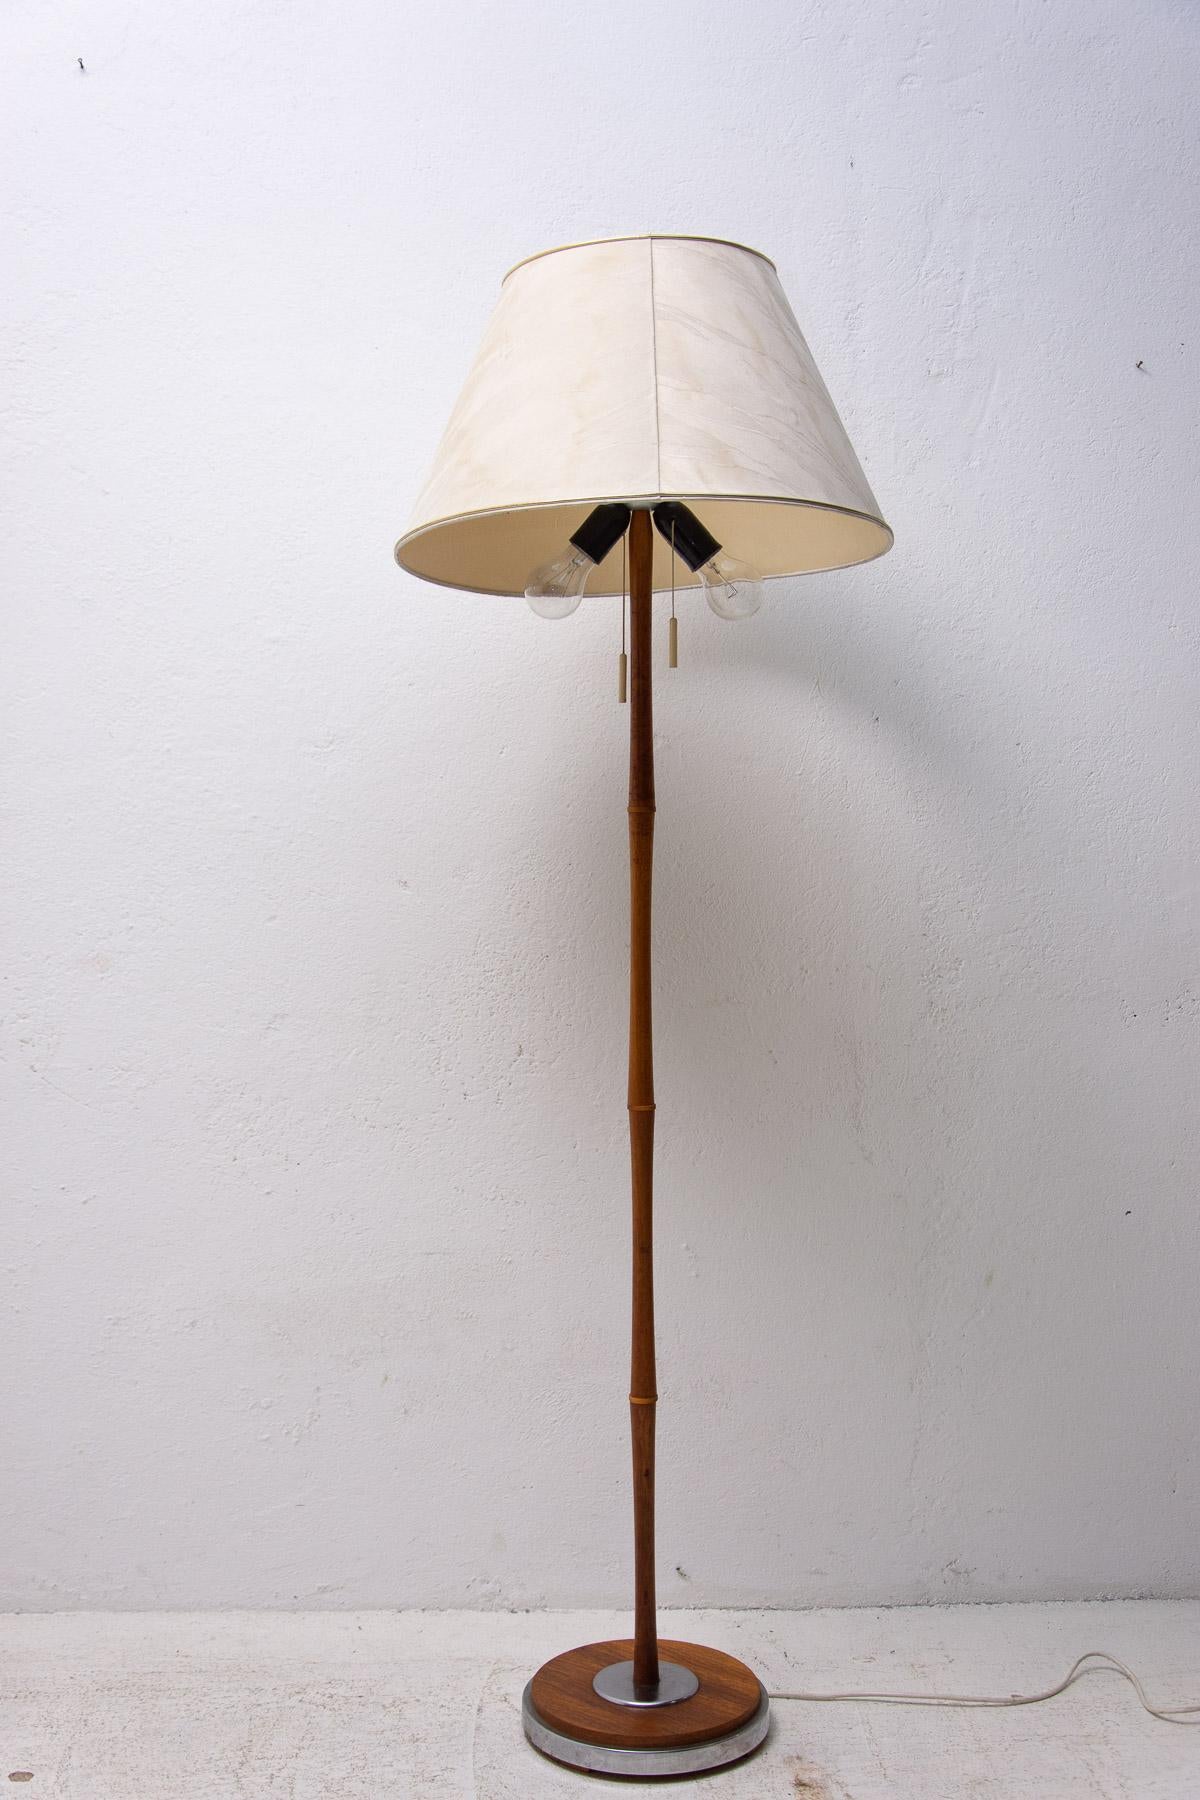 Mid century floor lamp from the 1960´s. It was made in the former Czechoslovakia.

The lamp is in its very good original condition. It features an original fabric lampshade, chromium plated and woodden structure. The lamp is fully